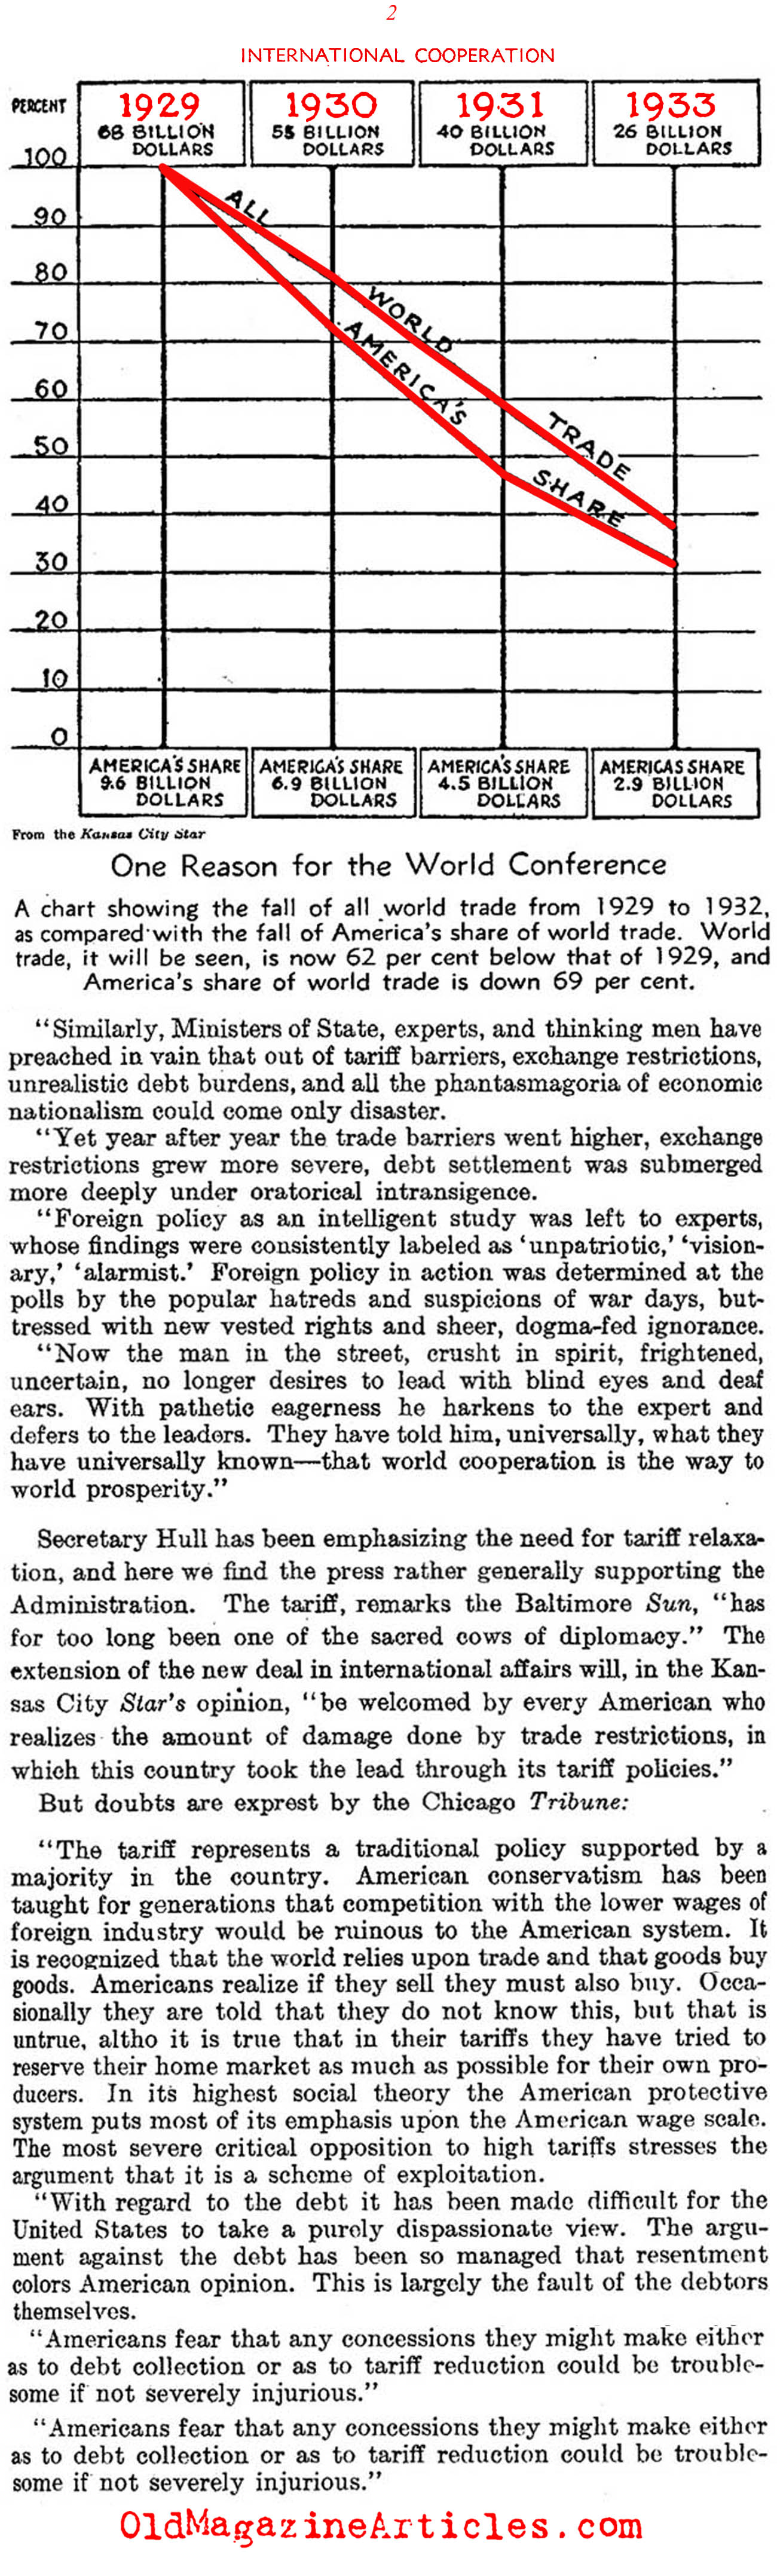 The Economic Collapse of the World (Literary Digest, 1933)